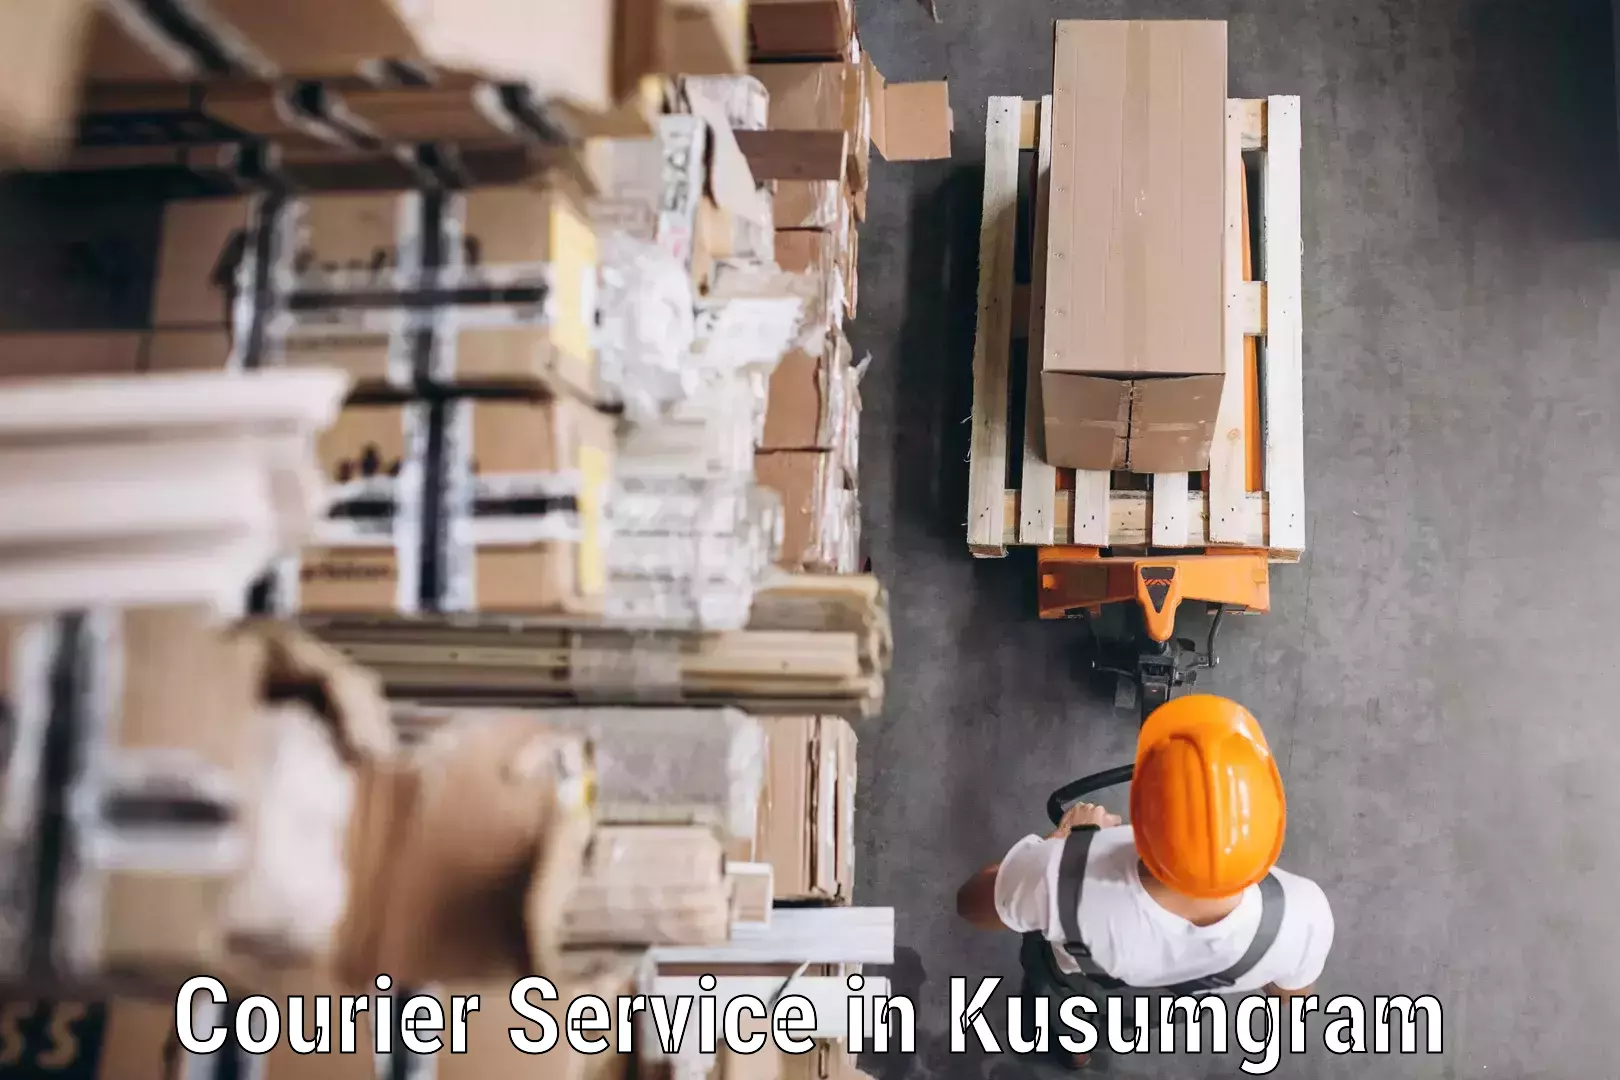 Overnight delivery services in Kusumgram